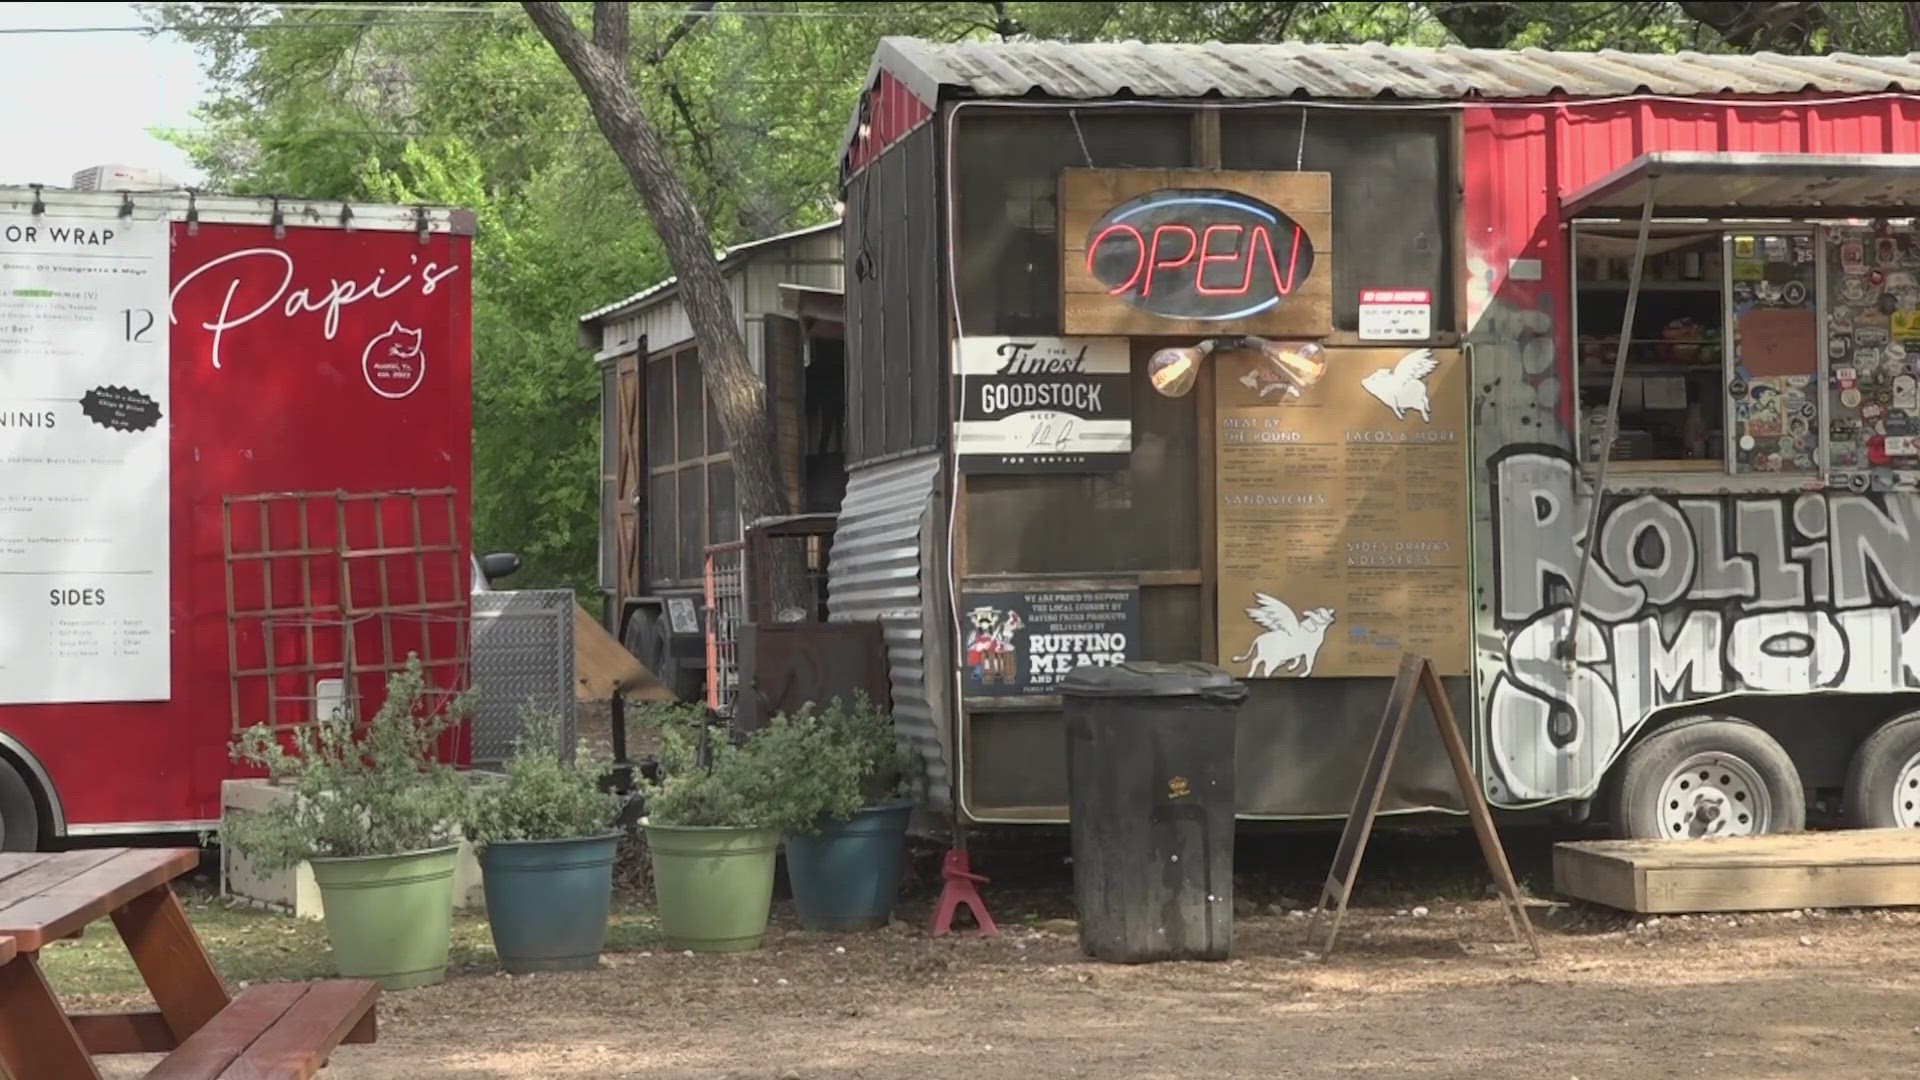 Instead of an inspector coming to them like brick-and-mortar restaurants, Austin food trucks have to close down and pay to tow their trucks for an inspection.